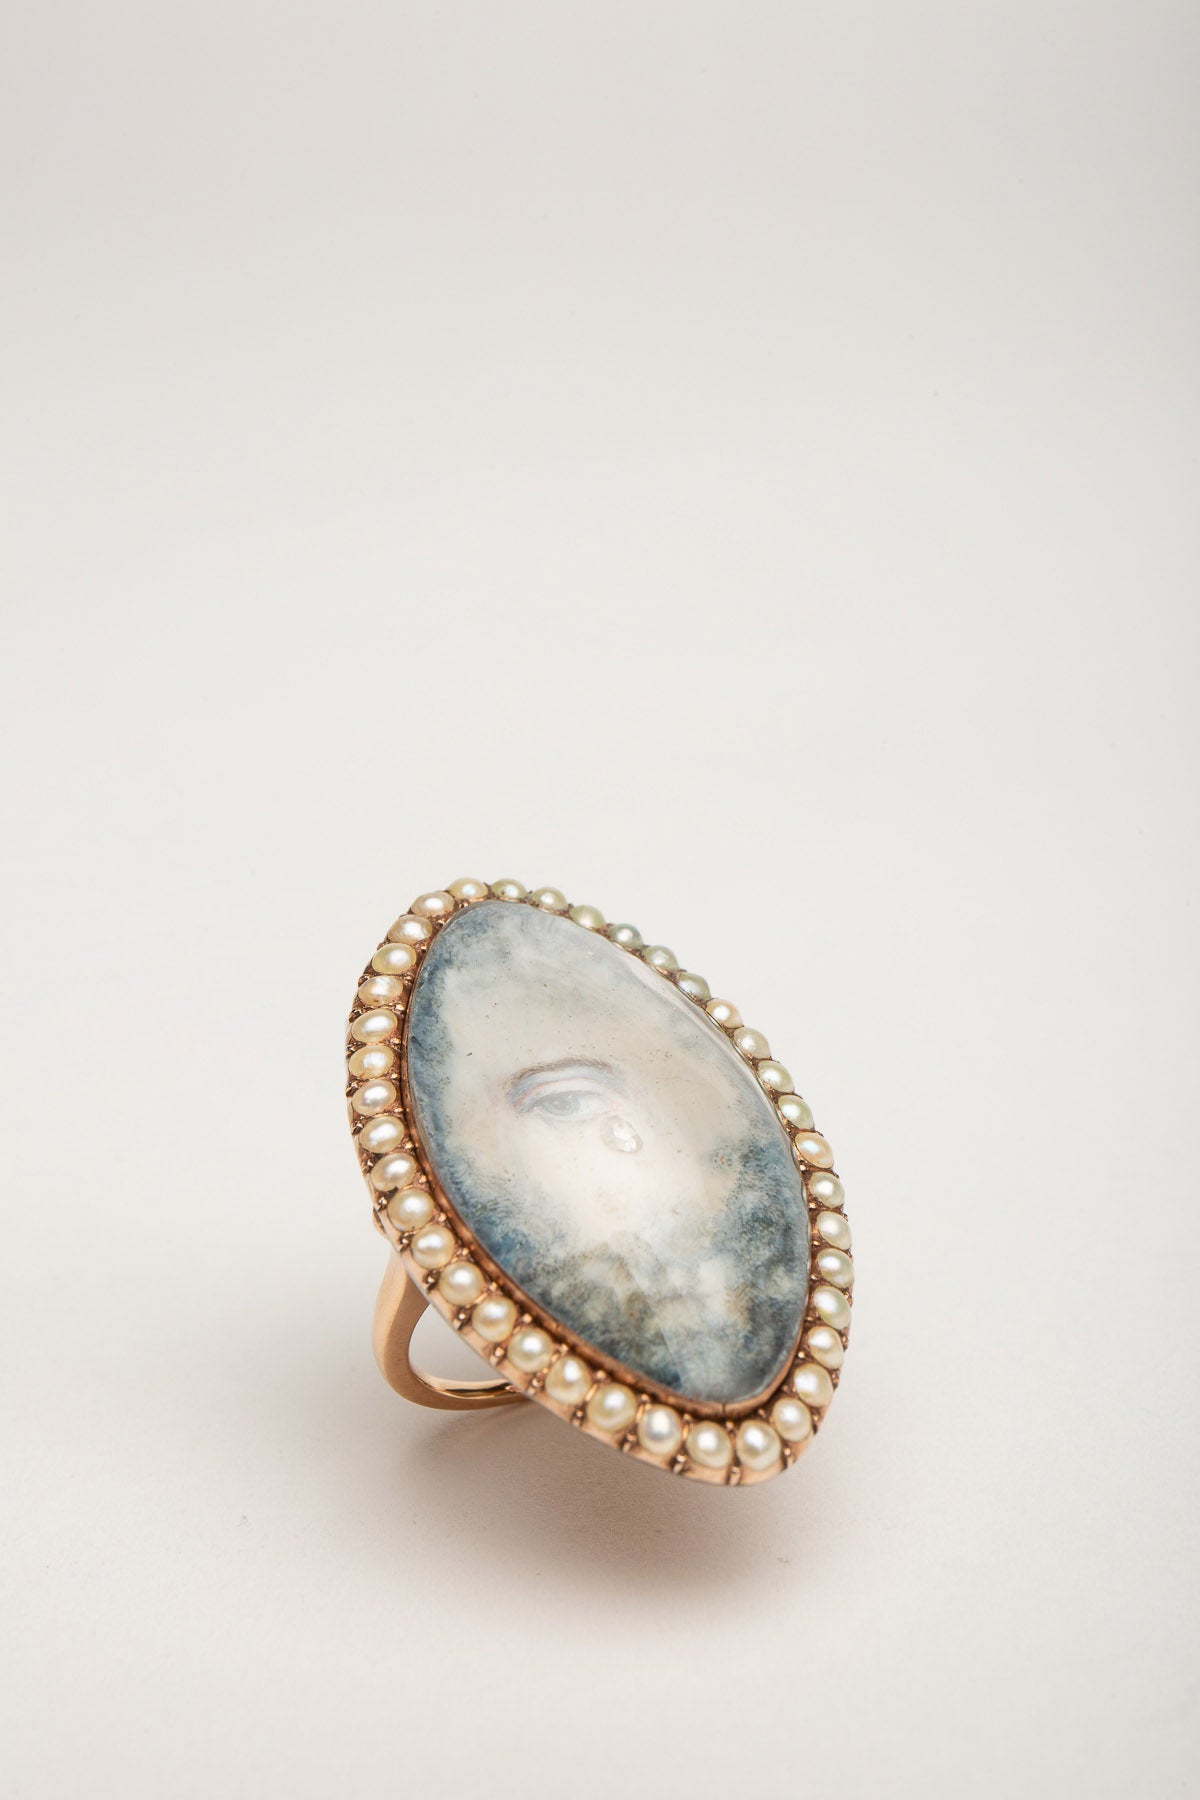 MAXFIELD PRIVATE COLLECTION | 1800'S PAINTED EYE PEARL RING